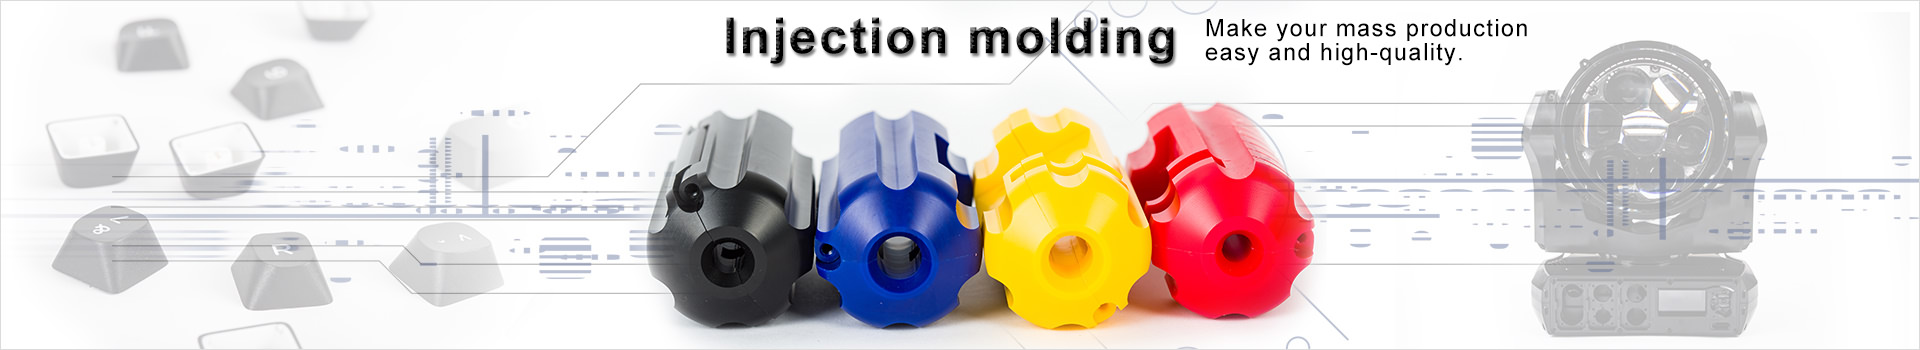 Injection molding|Injection molding services